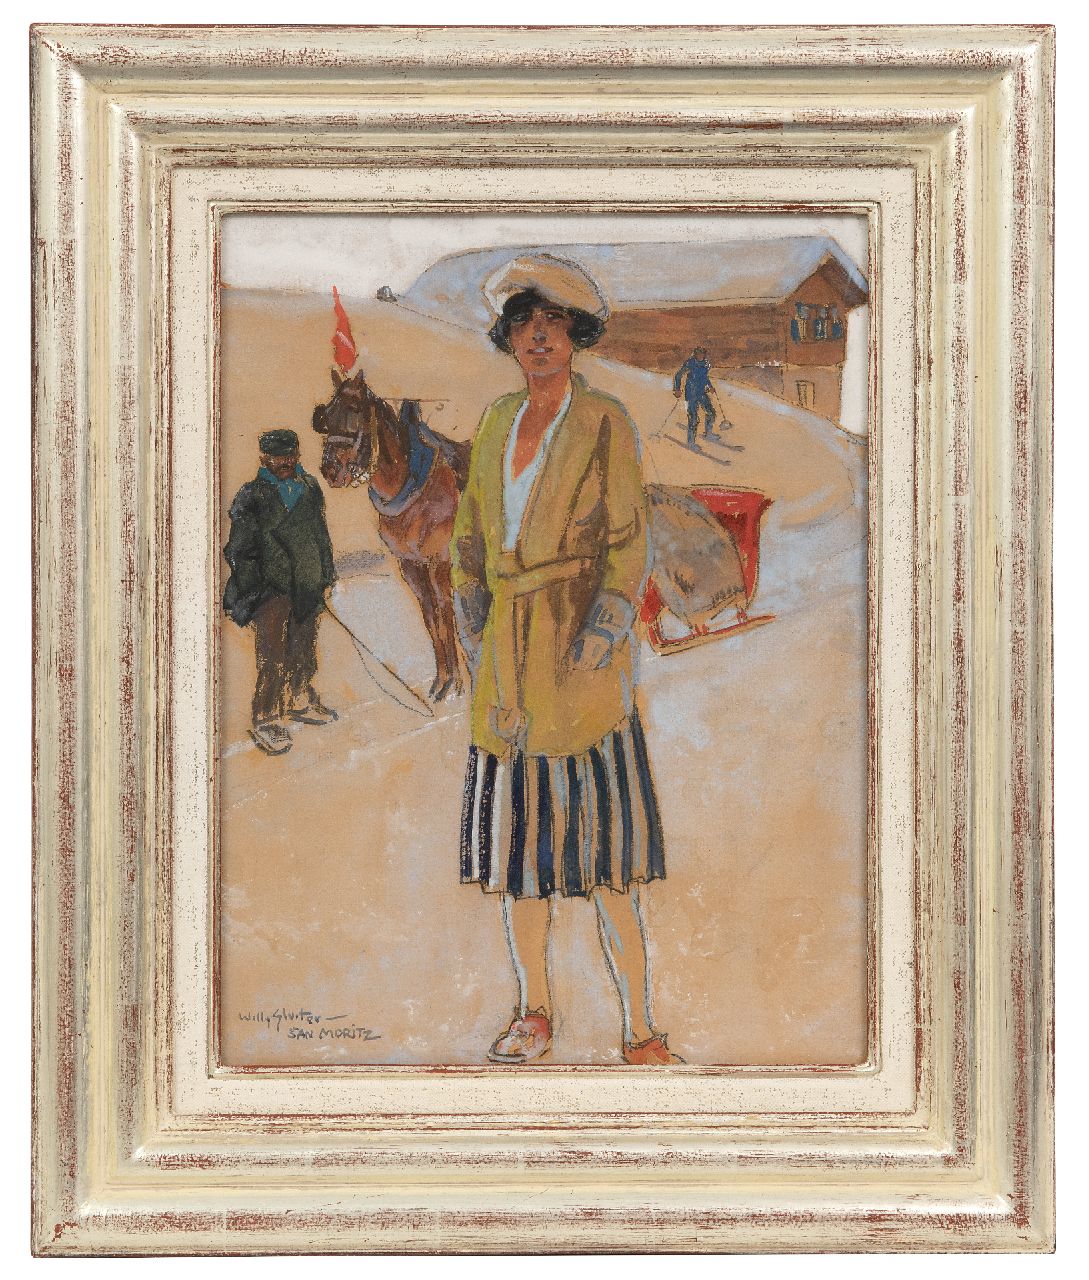 Sluiter J.W.  | Jan Willem 'Willy' Sluiter, Winter sports in St. Moritz, black chalk and watercolour on paper 31.2 x 25.1 cm, signed l.l. and dated on the reverse 1928